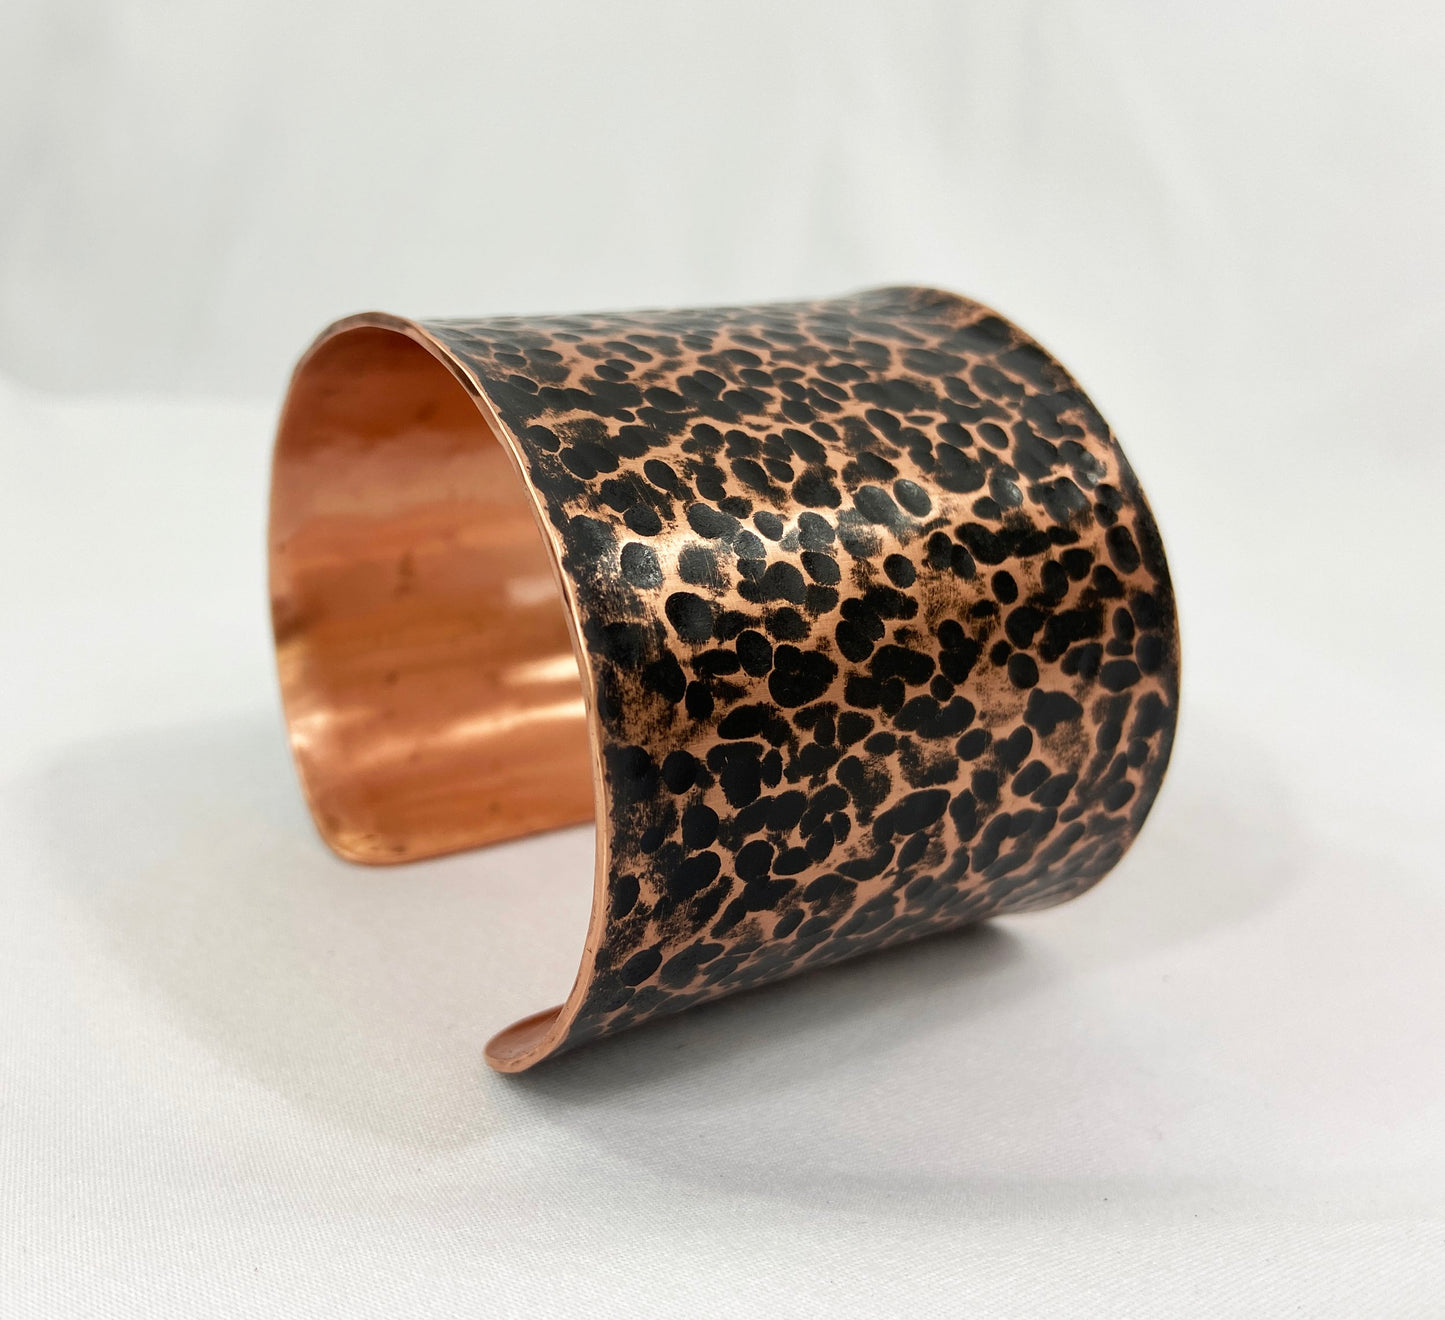 Hammered Copper Cuff Bracelet with Antique Patina/Ball Peen pattern